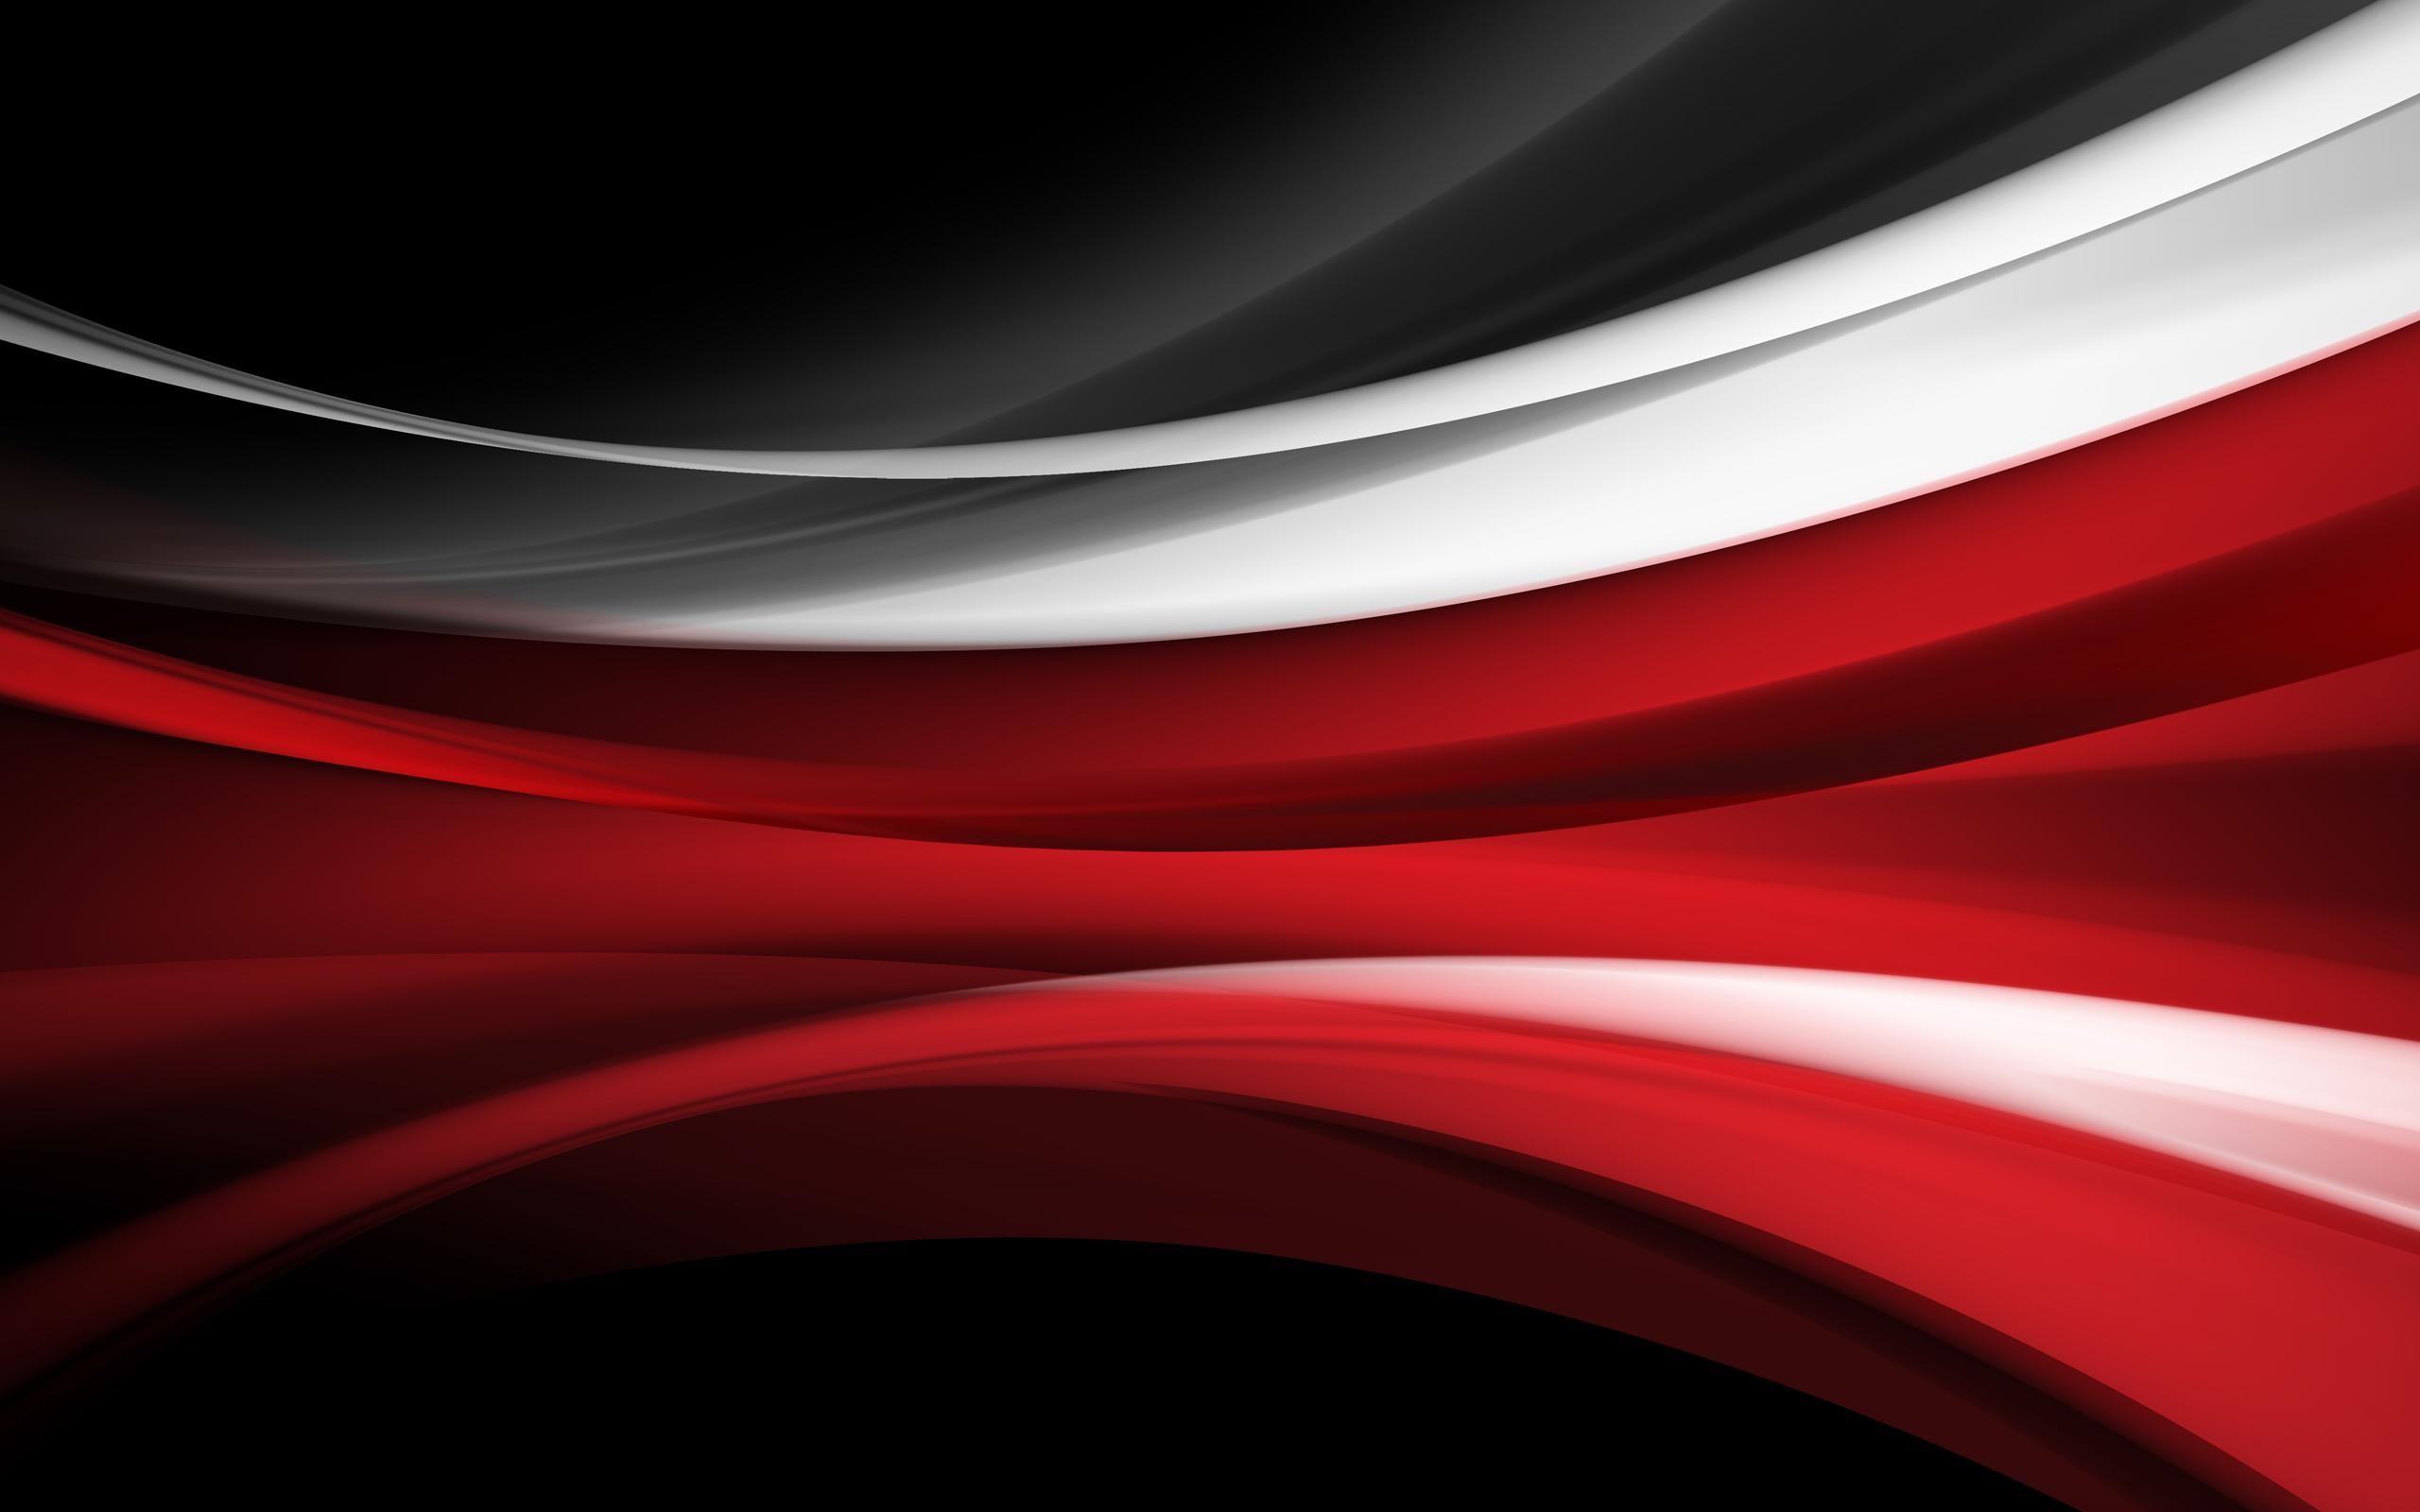 Free HD Black And Red Wallpaper